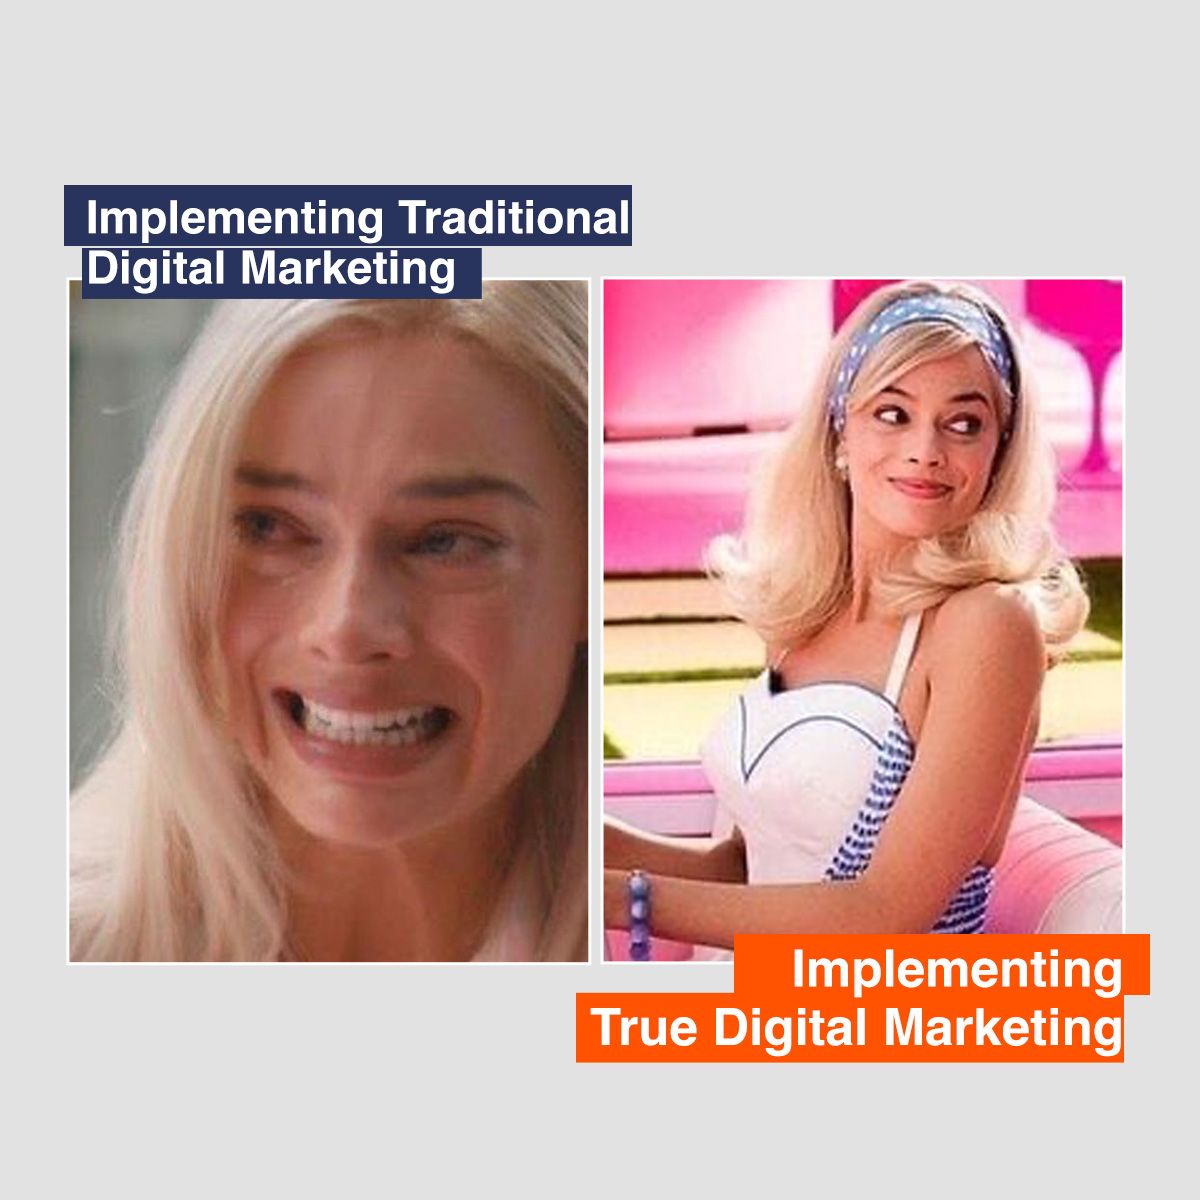 Implementing Traditional Digital Marketing / Implementing True Digital Marketing